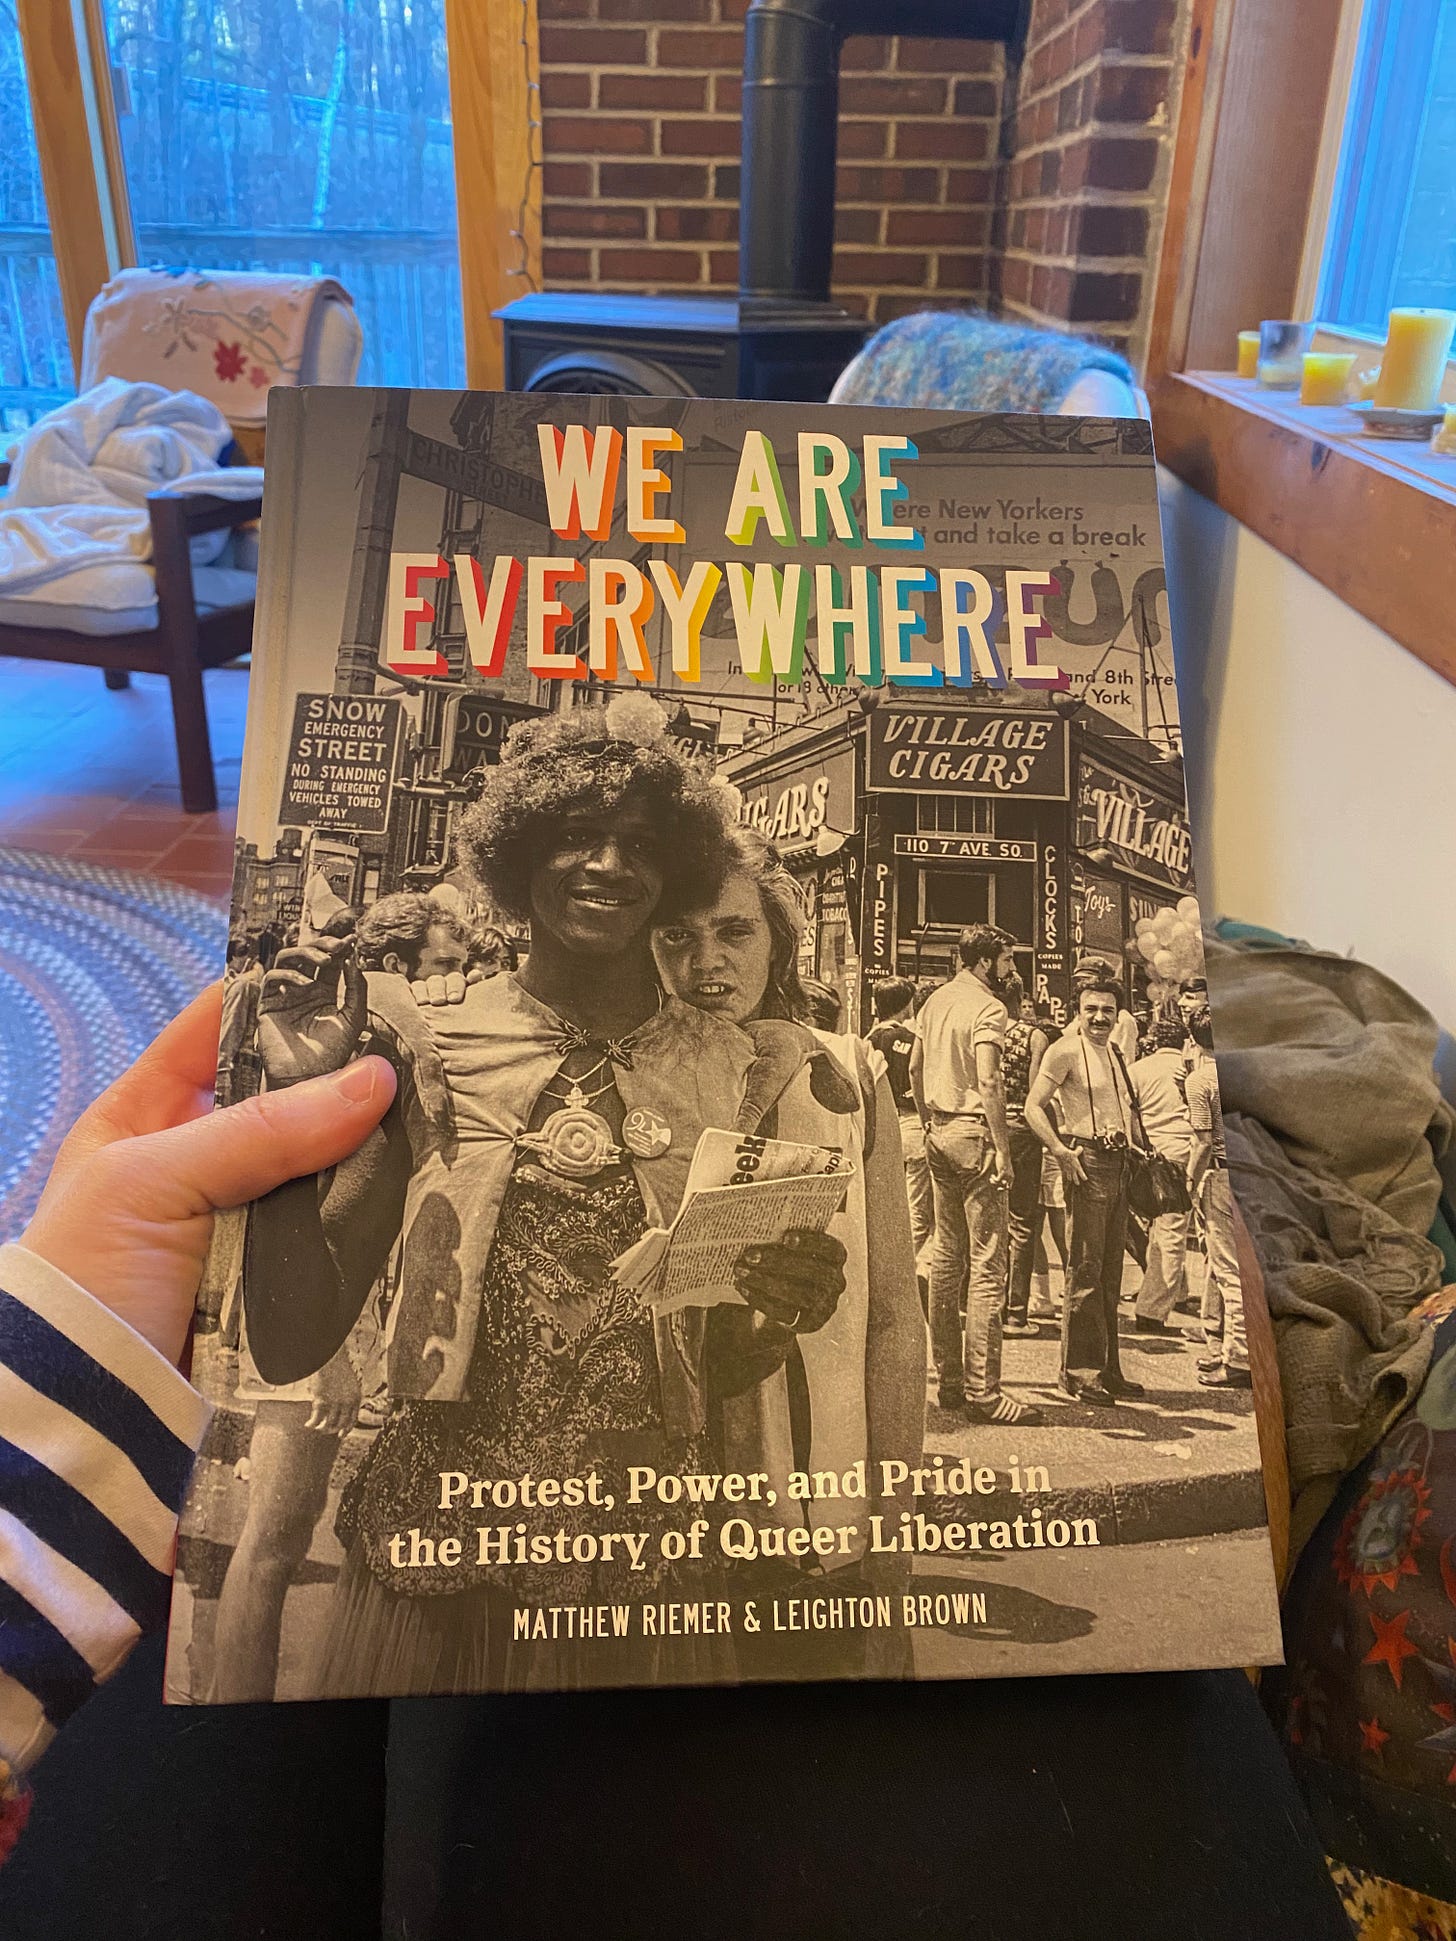 My hand holding up the photo book We Are Everywhere by Matthew Riemer and Leighton Brown. It is a large hardcover with a black and white photograph of Marsha P. Johnson on the cover. An armchair and windows looking out into the woods are visible in the background.